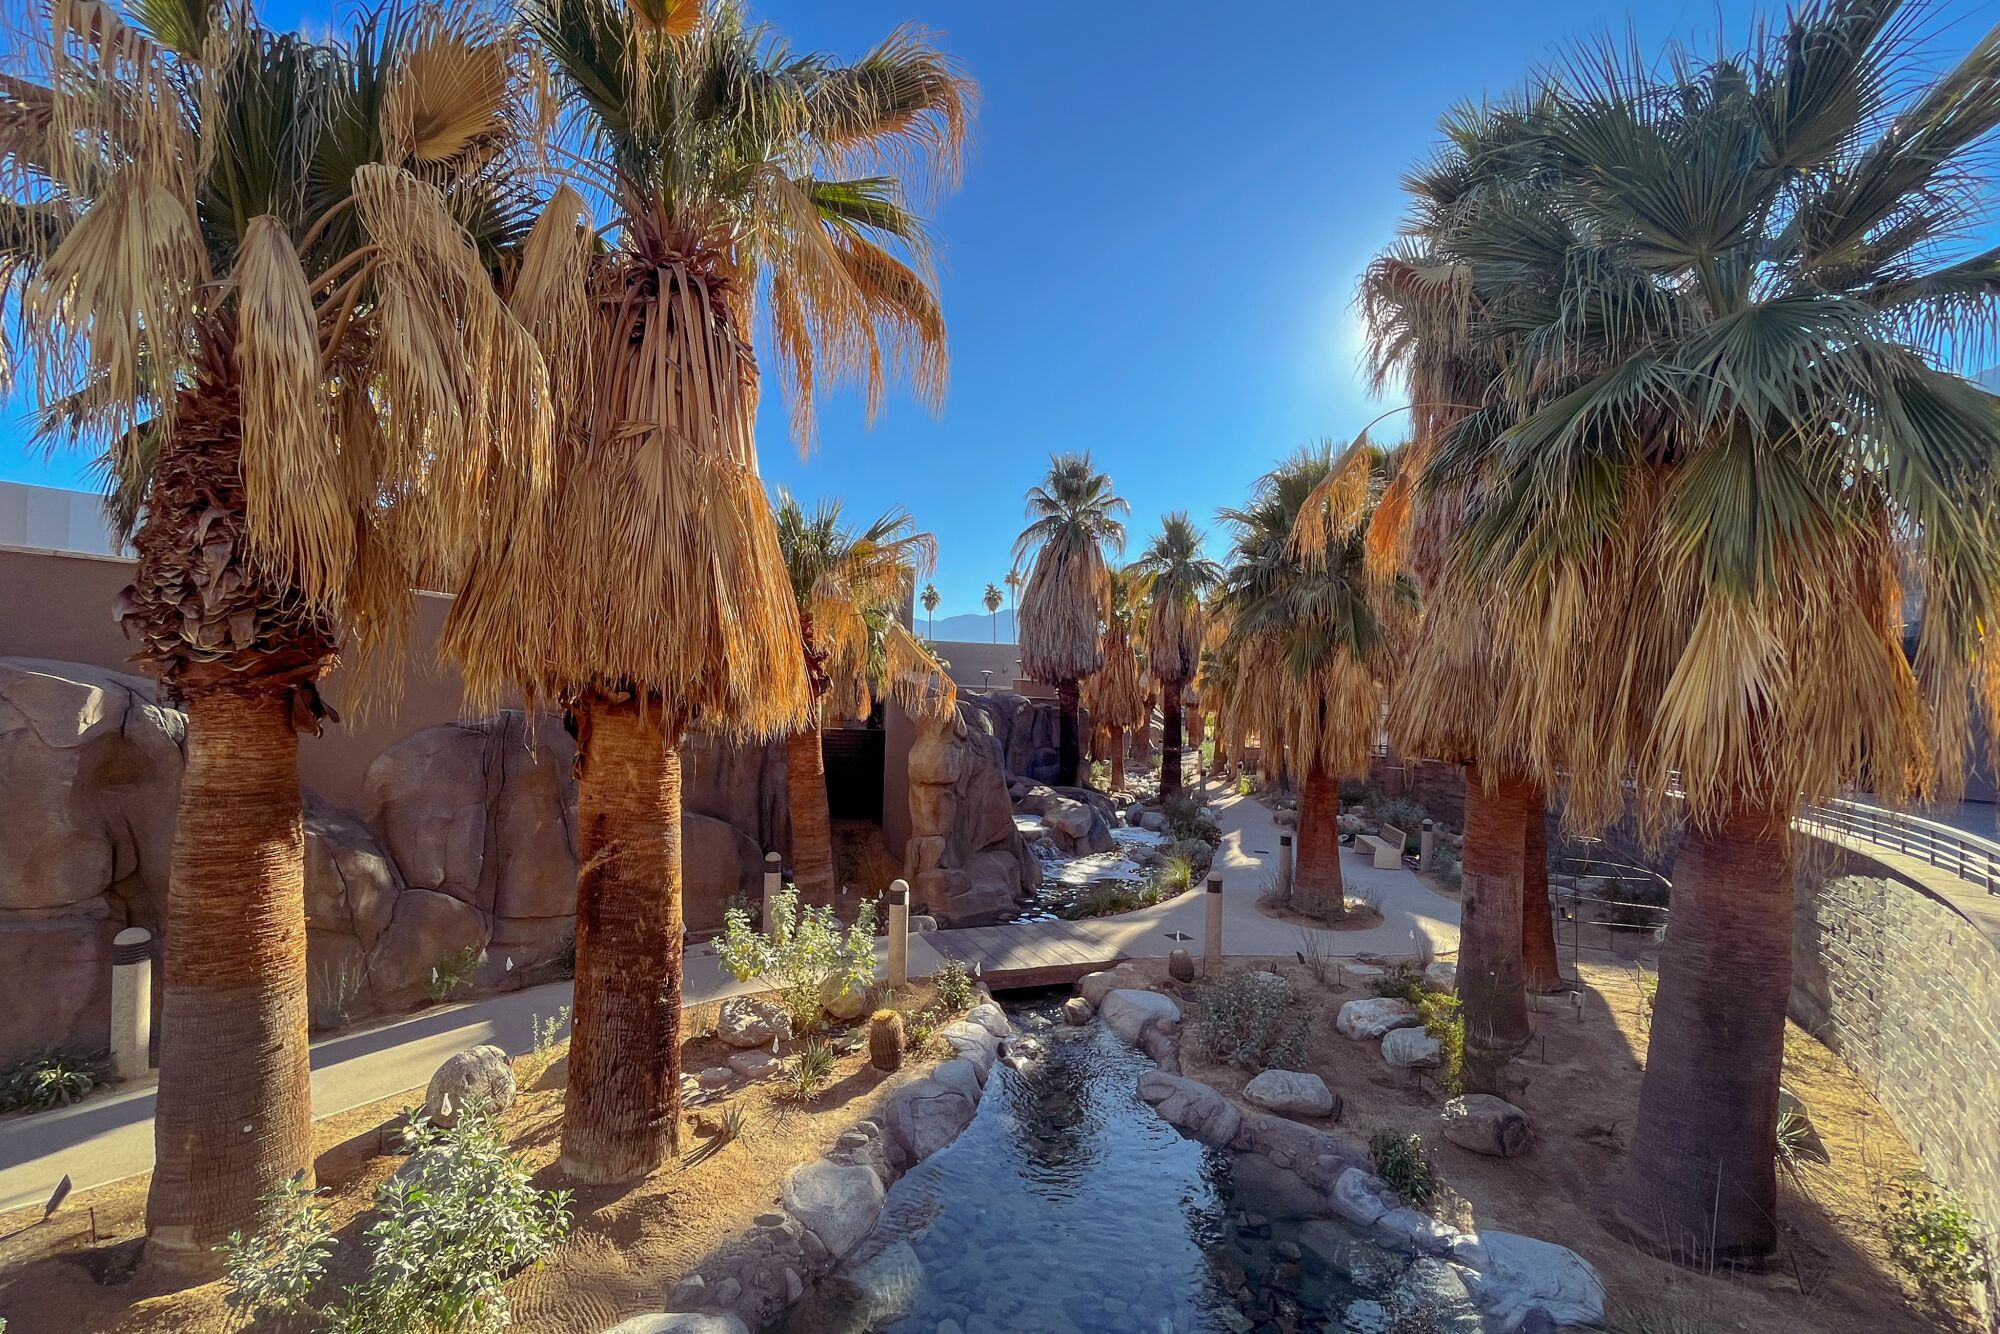 An oasis trail dotted with palm trees